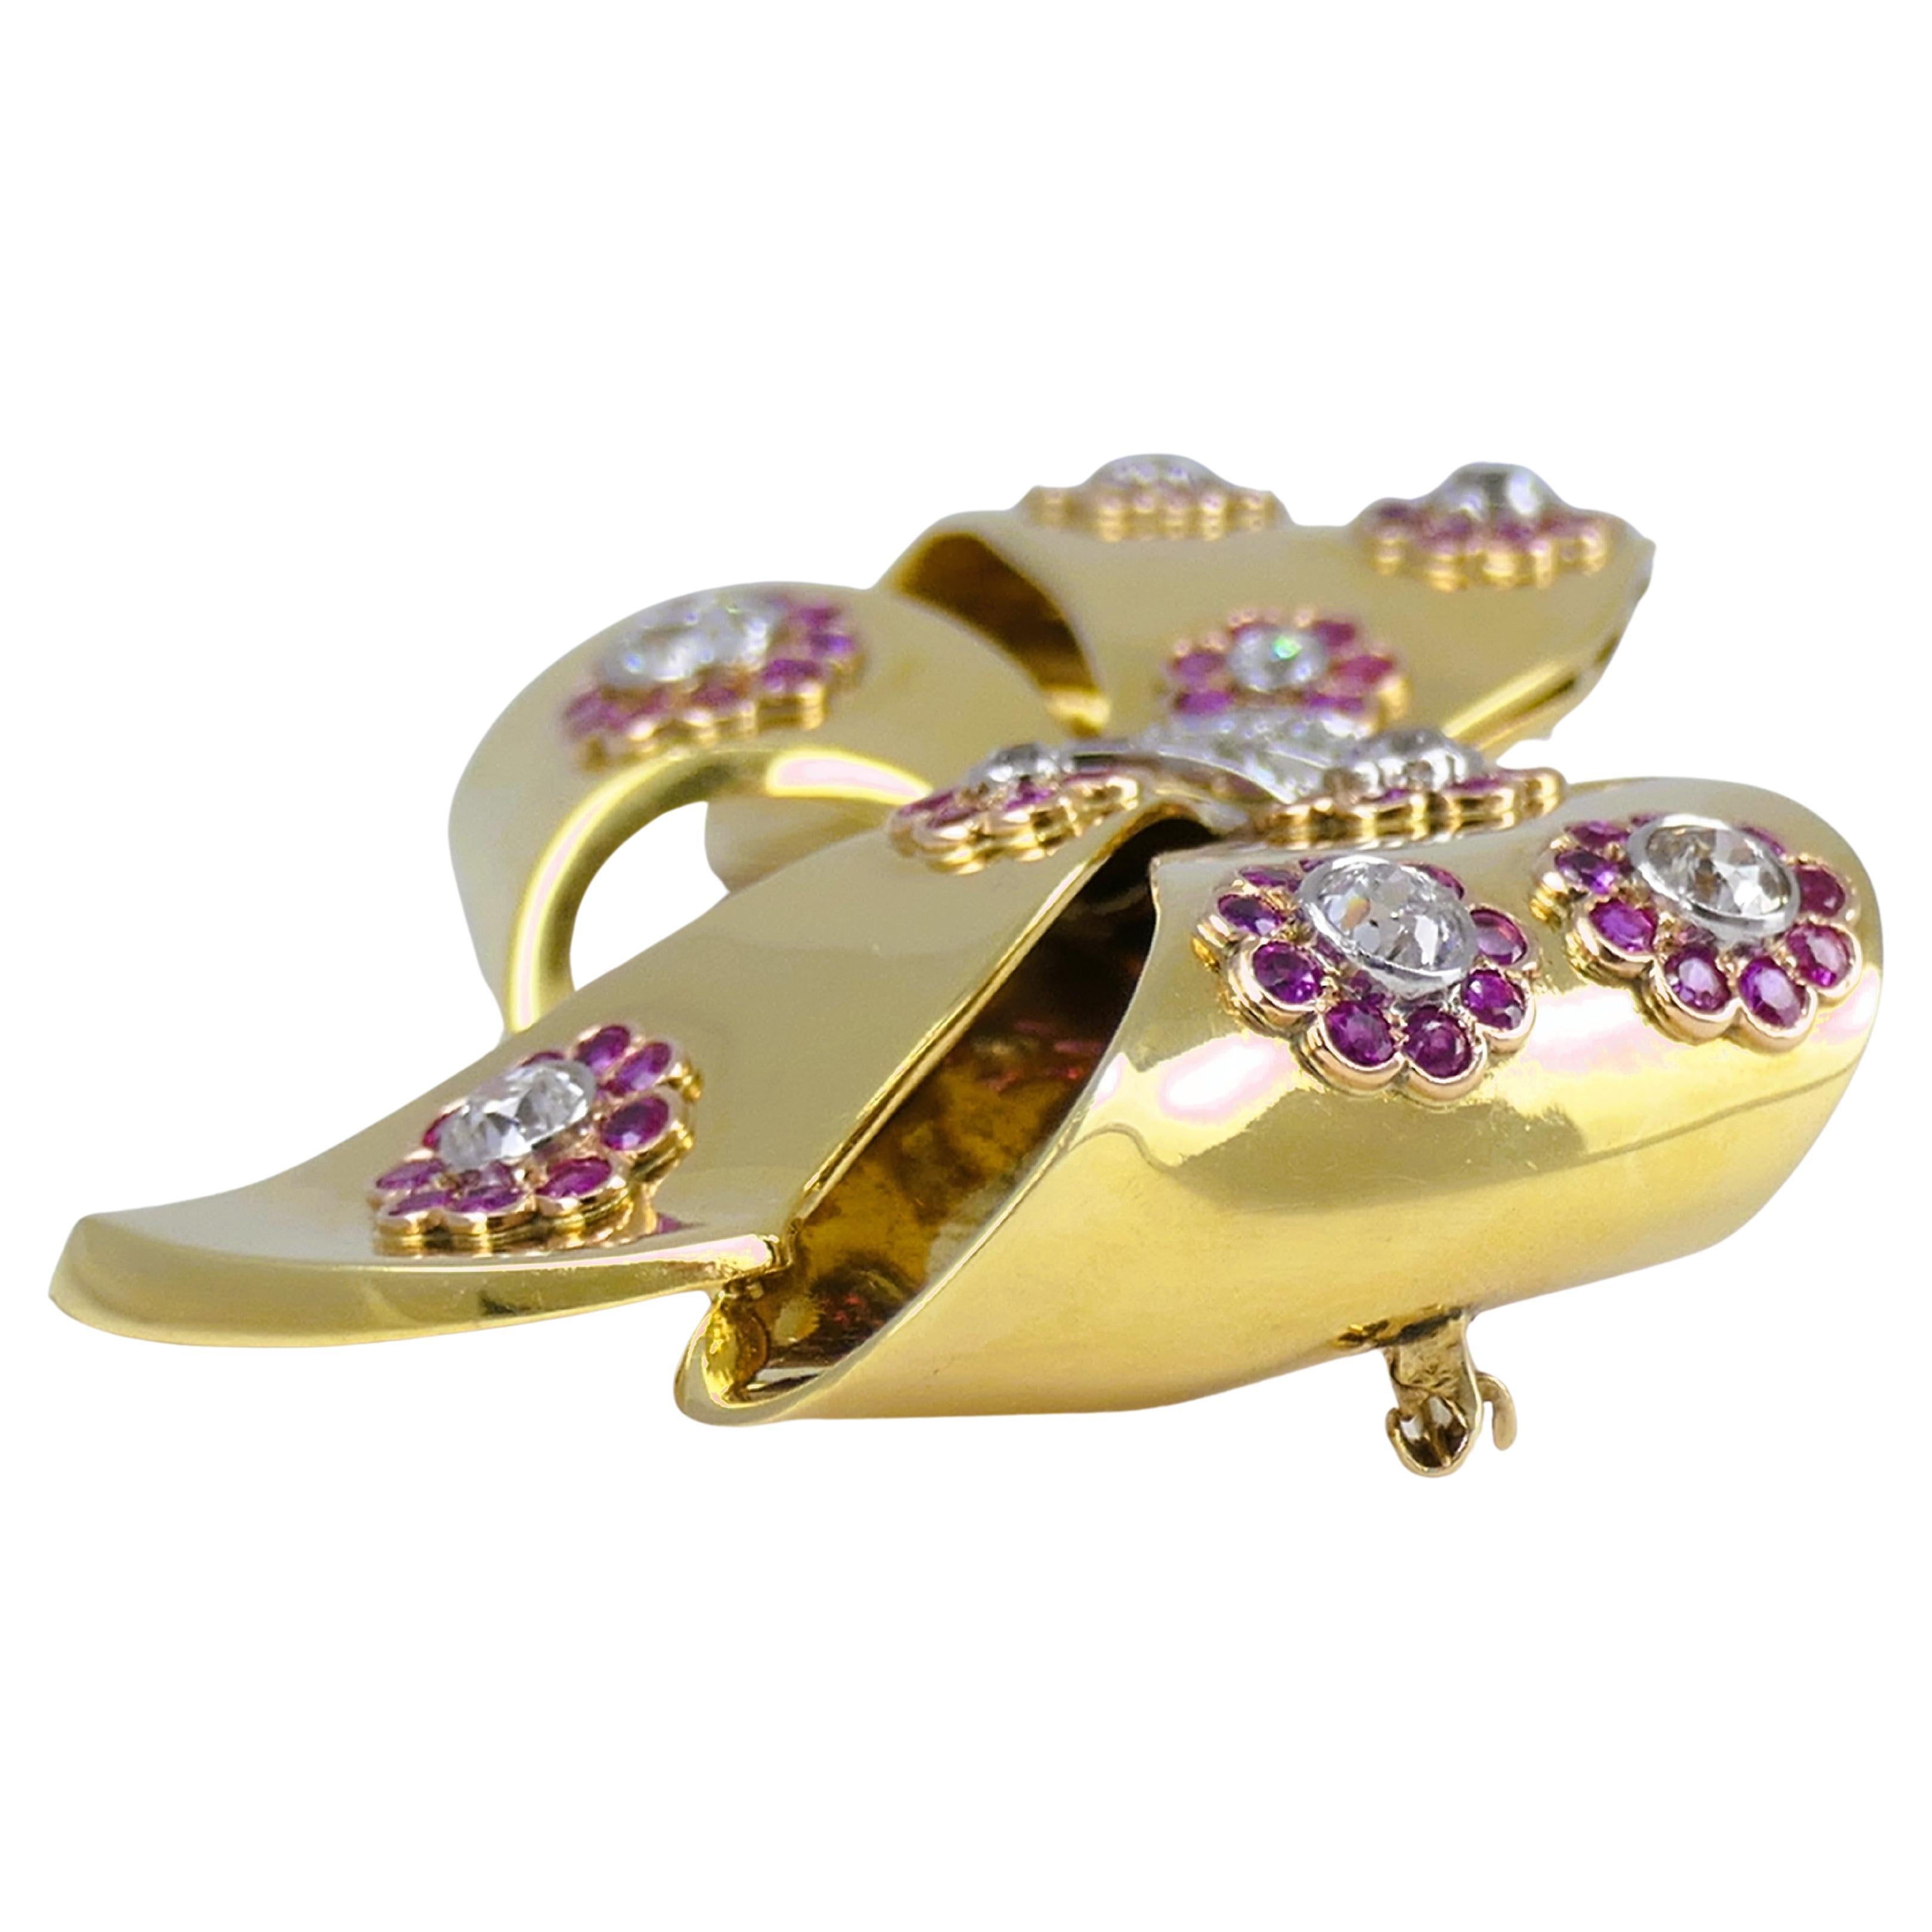 A lovely Retro bow brooch pin made of 18k gold with ruby and diamond.
The gemstones are assembled in beautiful florets, with ruby “petals” and diamond “stamens”. The bow is tied in the center with a white gold ribbon adorned with diamonds. 
This